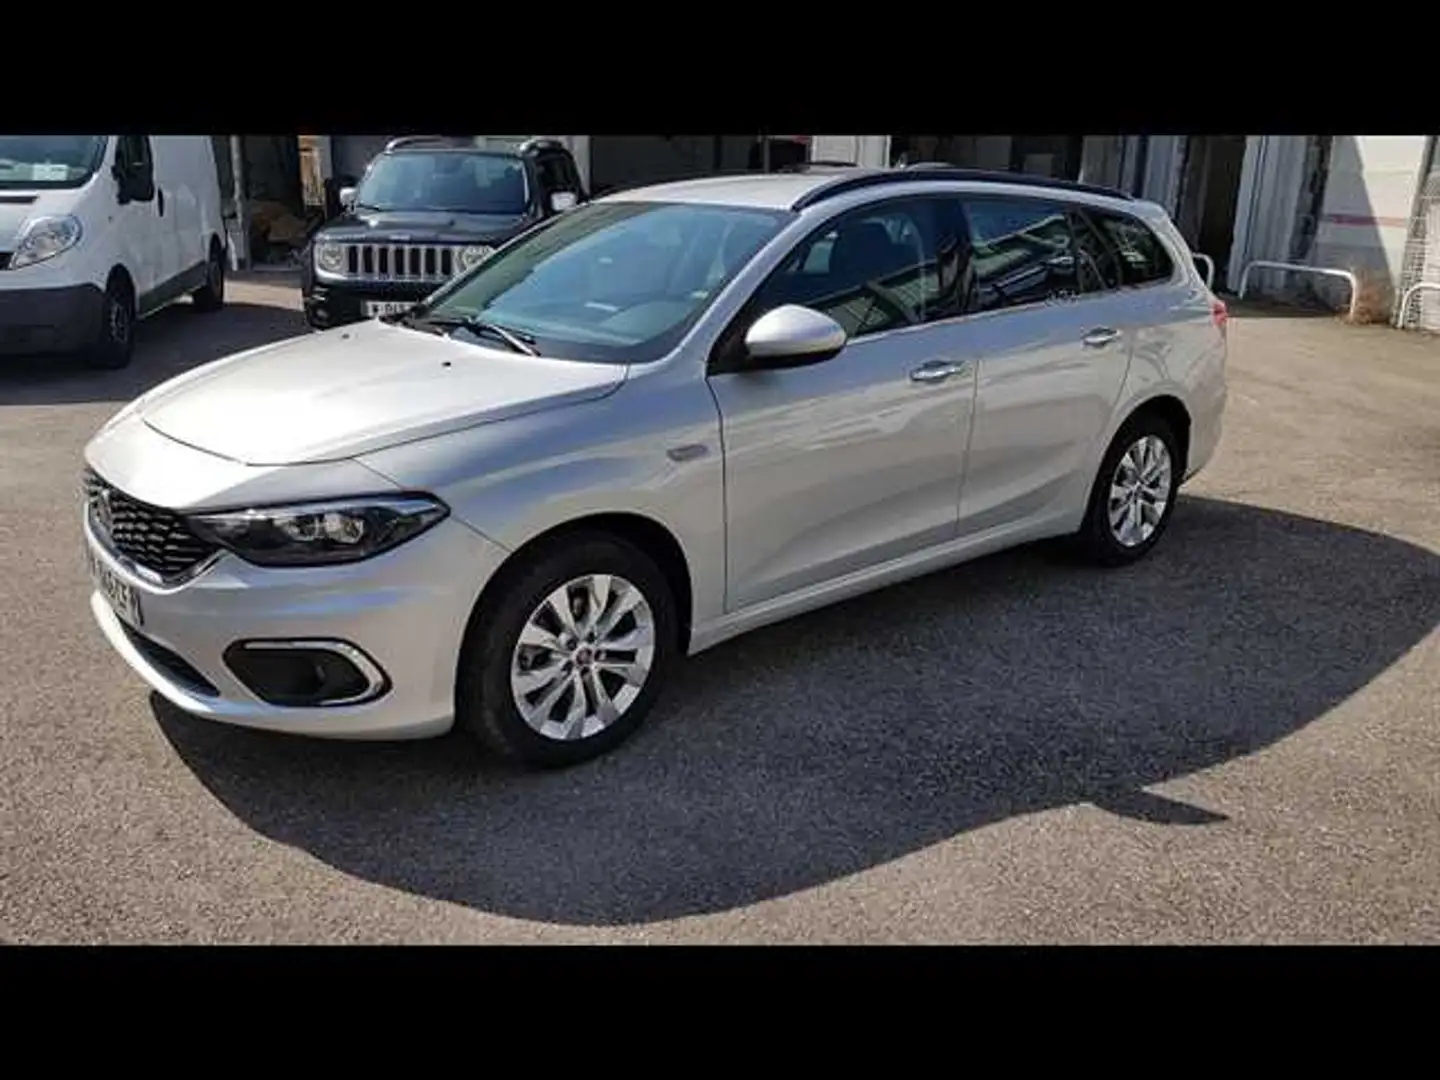 Fiat Tipo STATION WAGON 1.6 MULTIJET 120 CH START/STOP DCT L Gris - 1